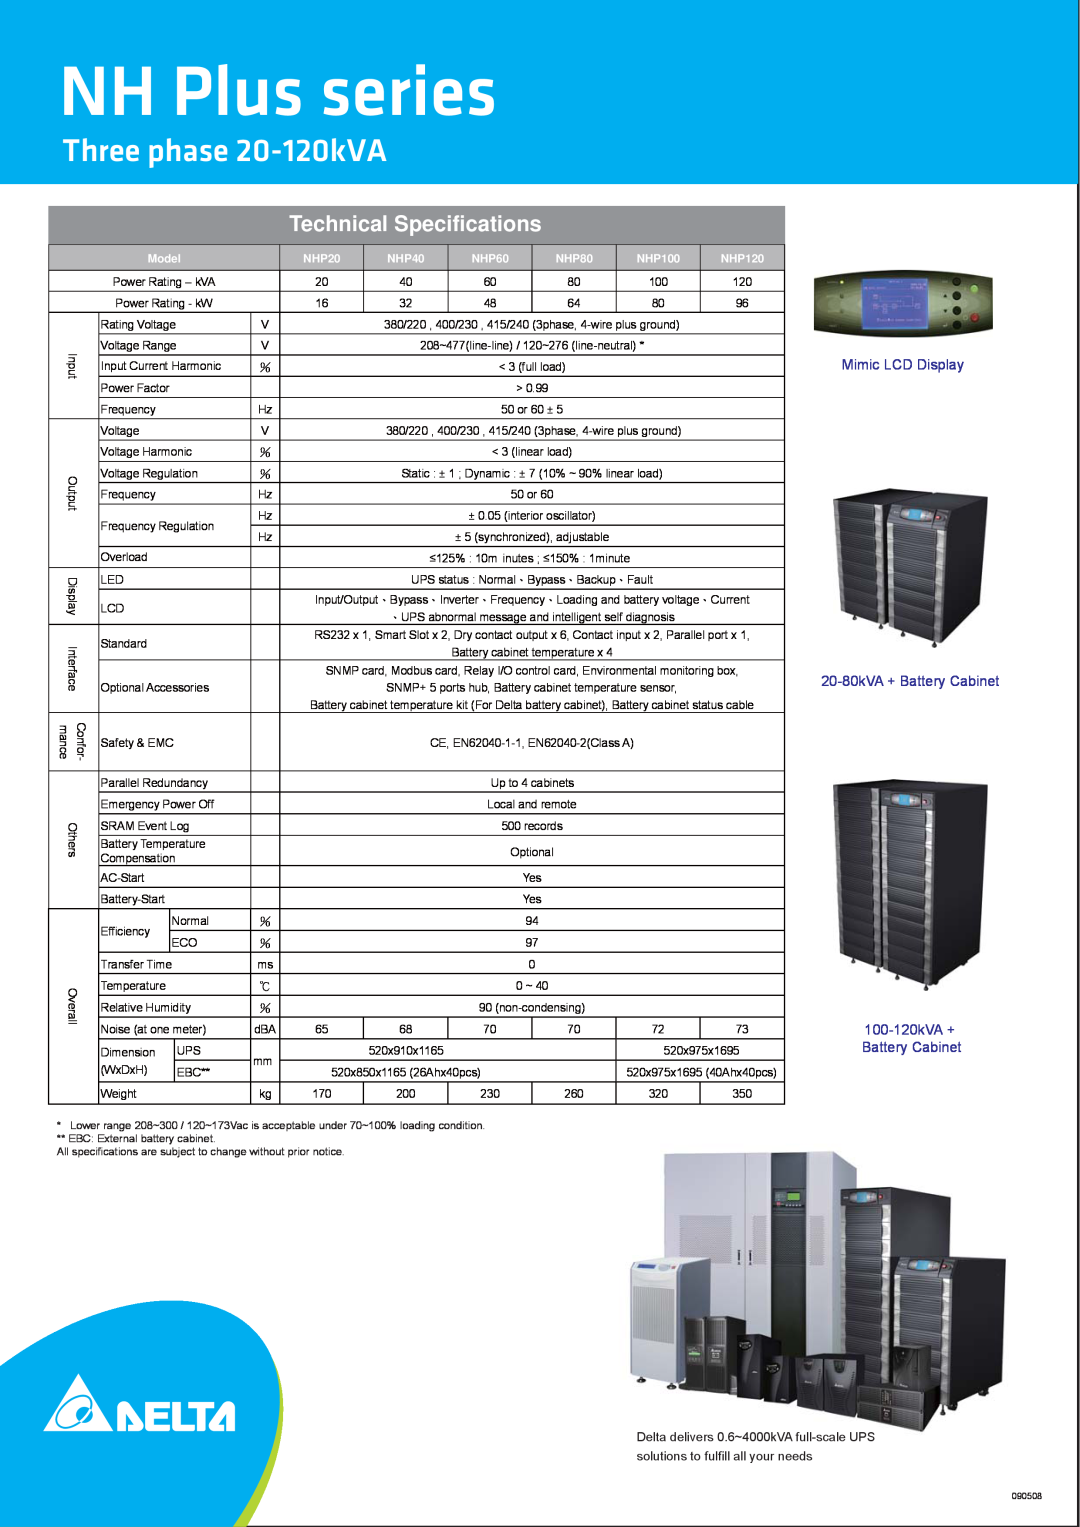 Delta Three phase 20-120kVA, NH Plus series, Technical Specifications, Mimic LCD Display 20-80kVA + Battery Cabinet 